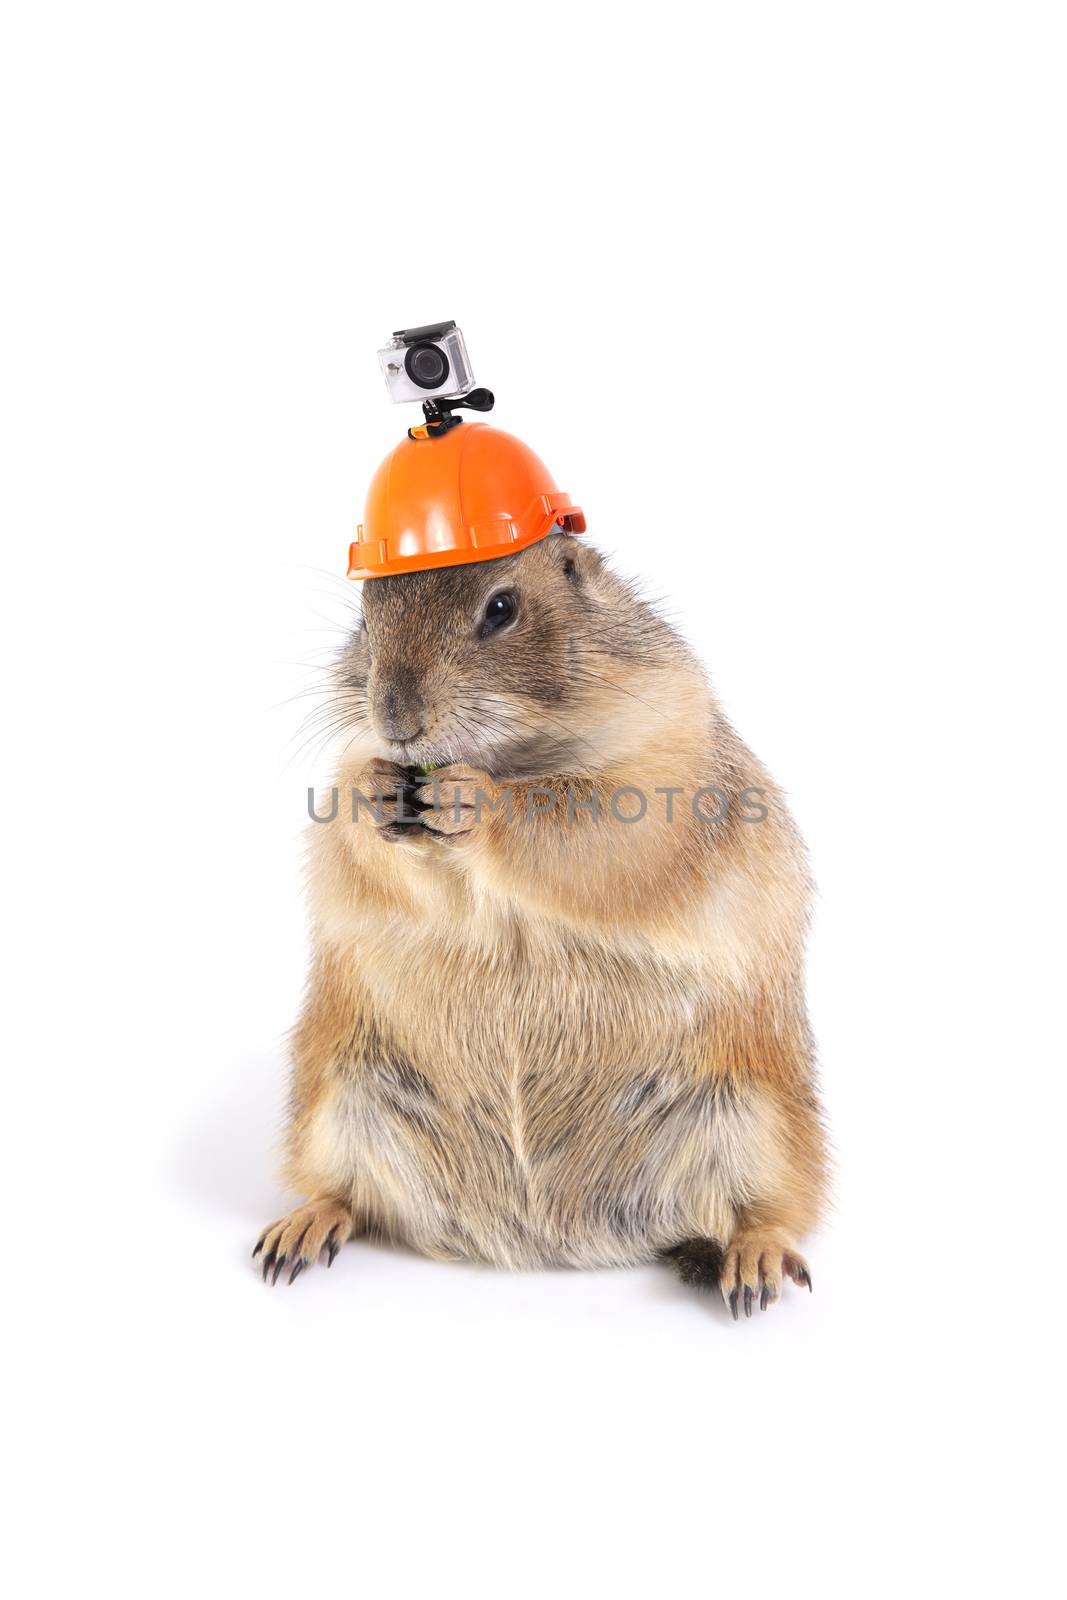 Funny prairie dog wearing safety helmet with action camera. by pandpstock_002